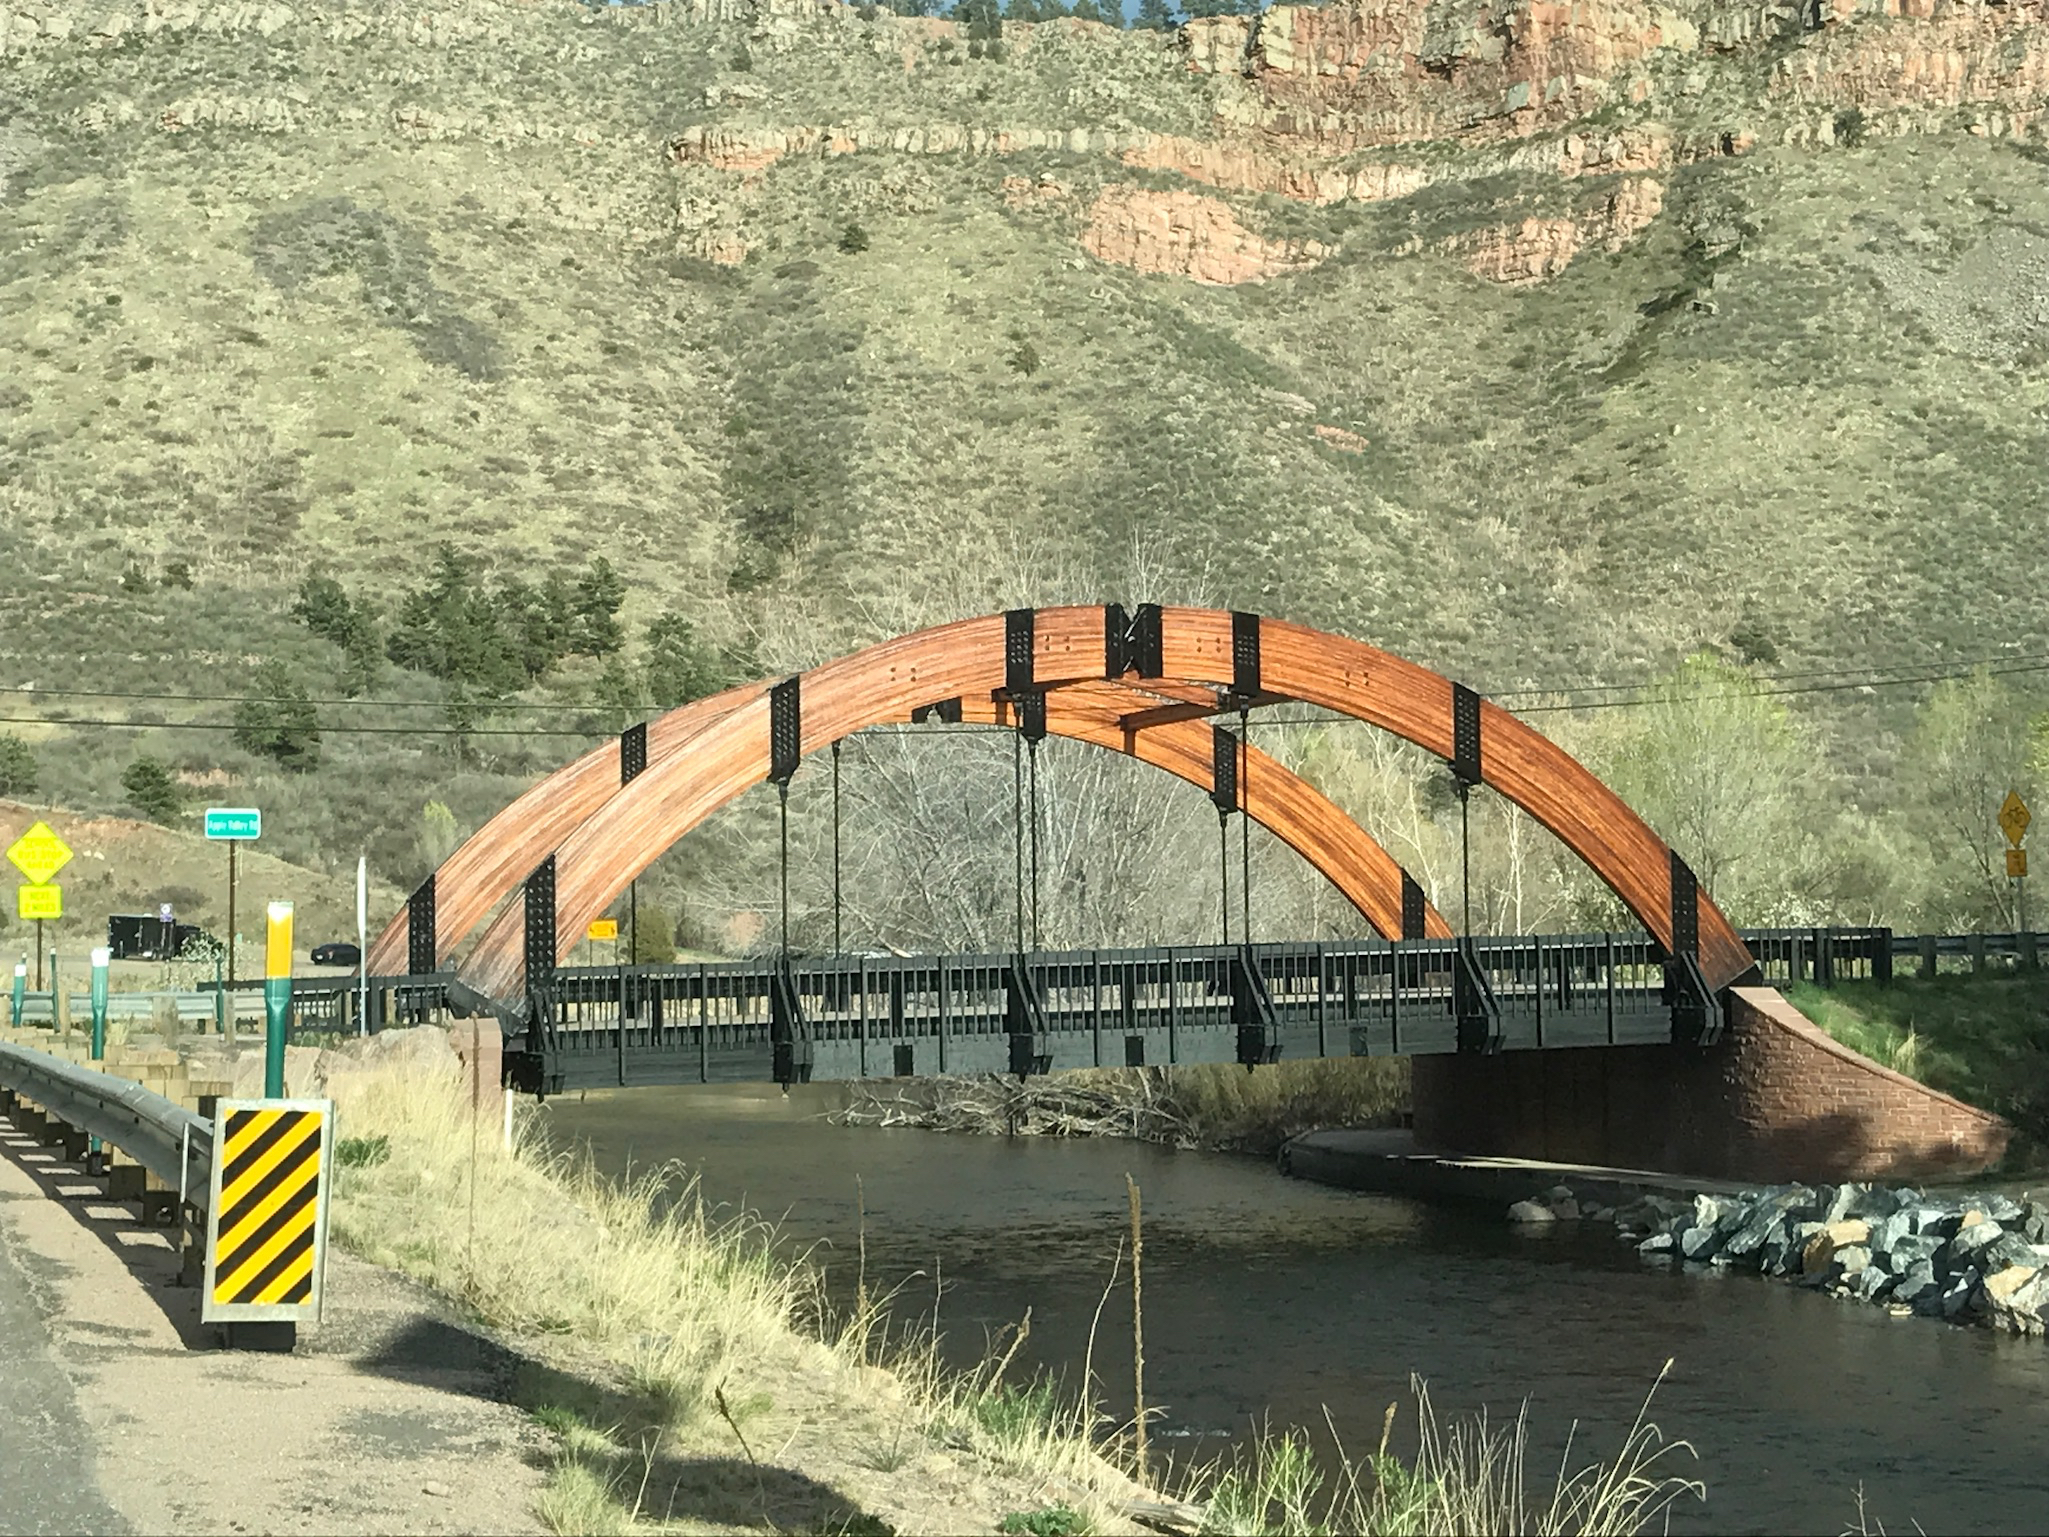 A cool looking bridge we took a picture of for our civil engineer friend